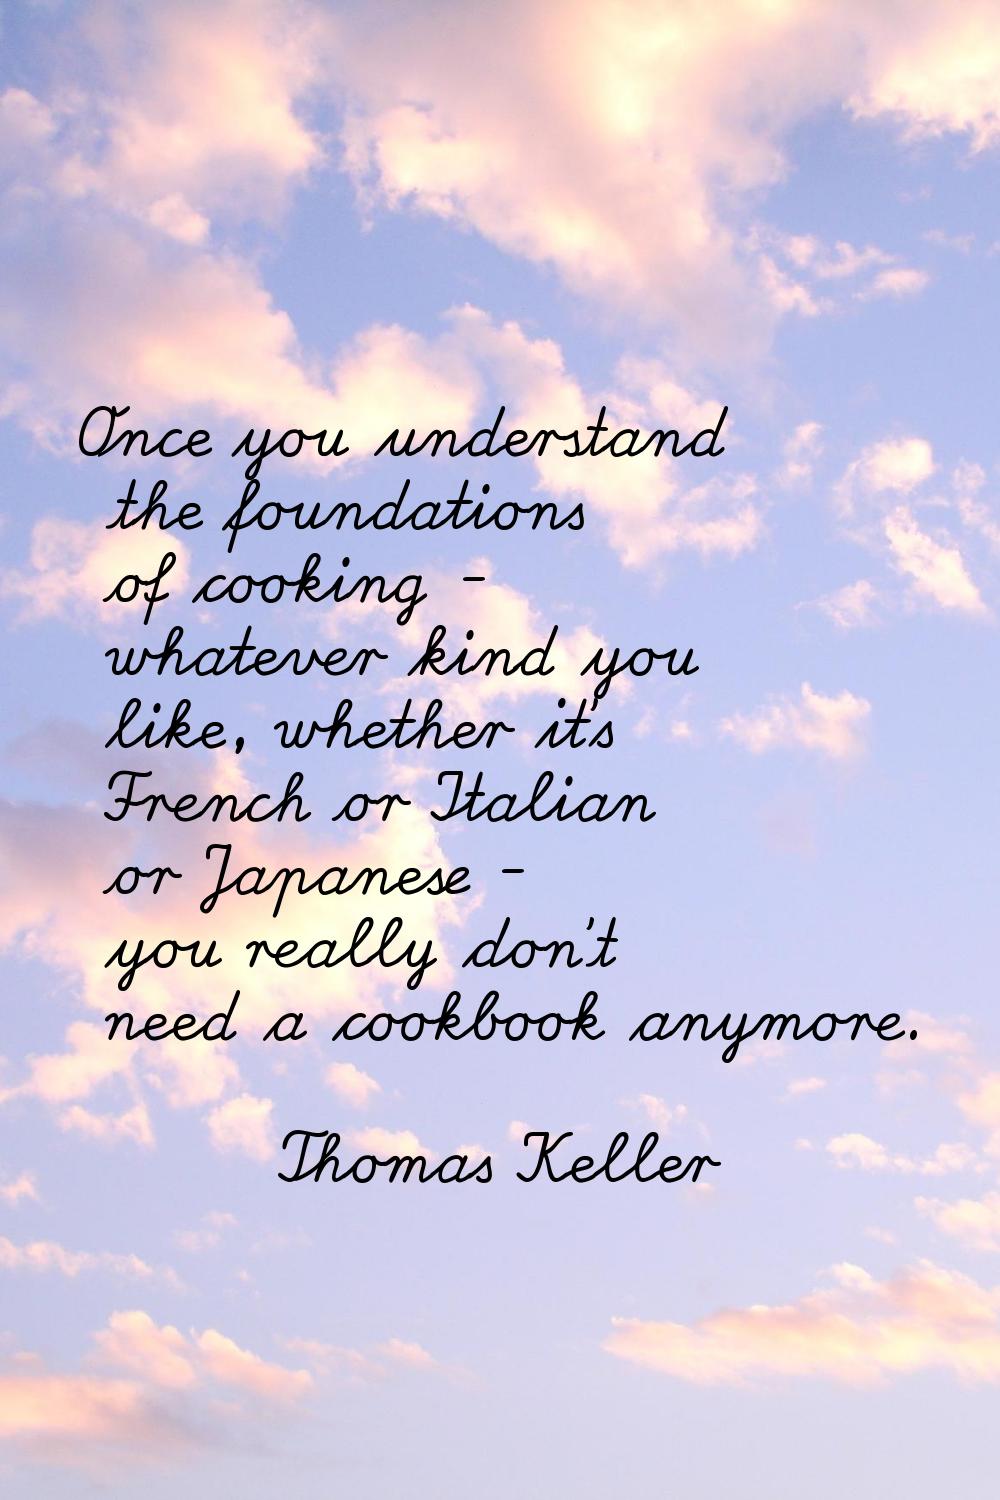 Once you understand the foundations of cooking - whatever kind you like, whether it's French or Ita